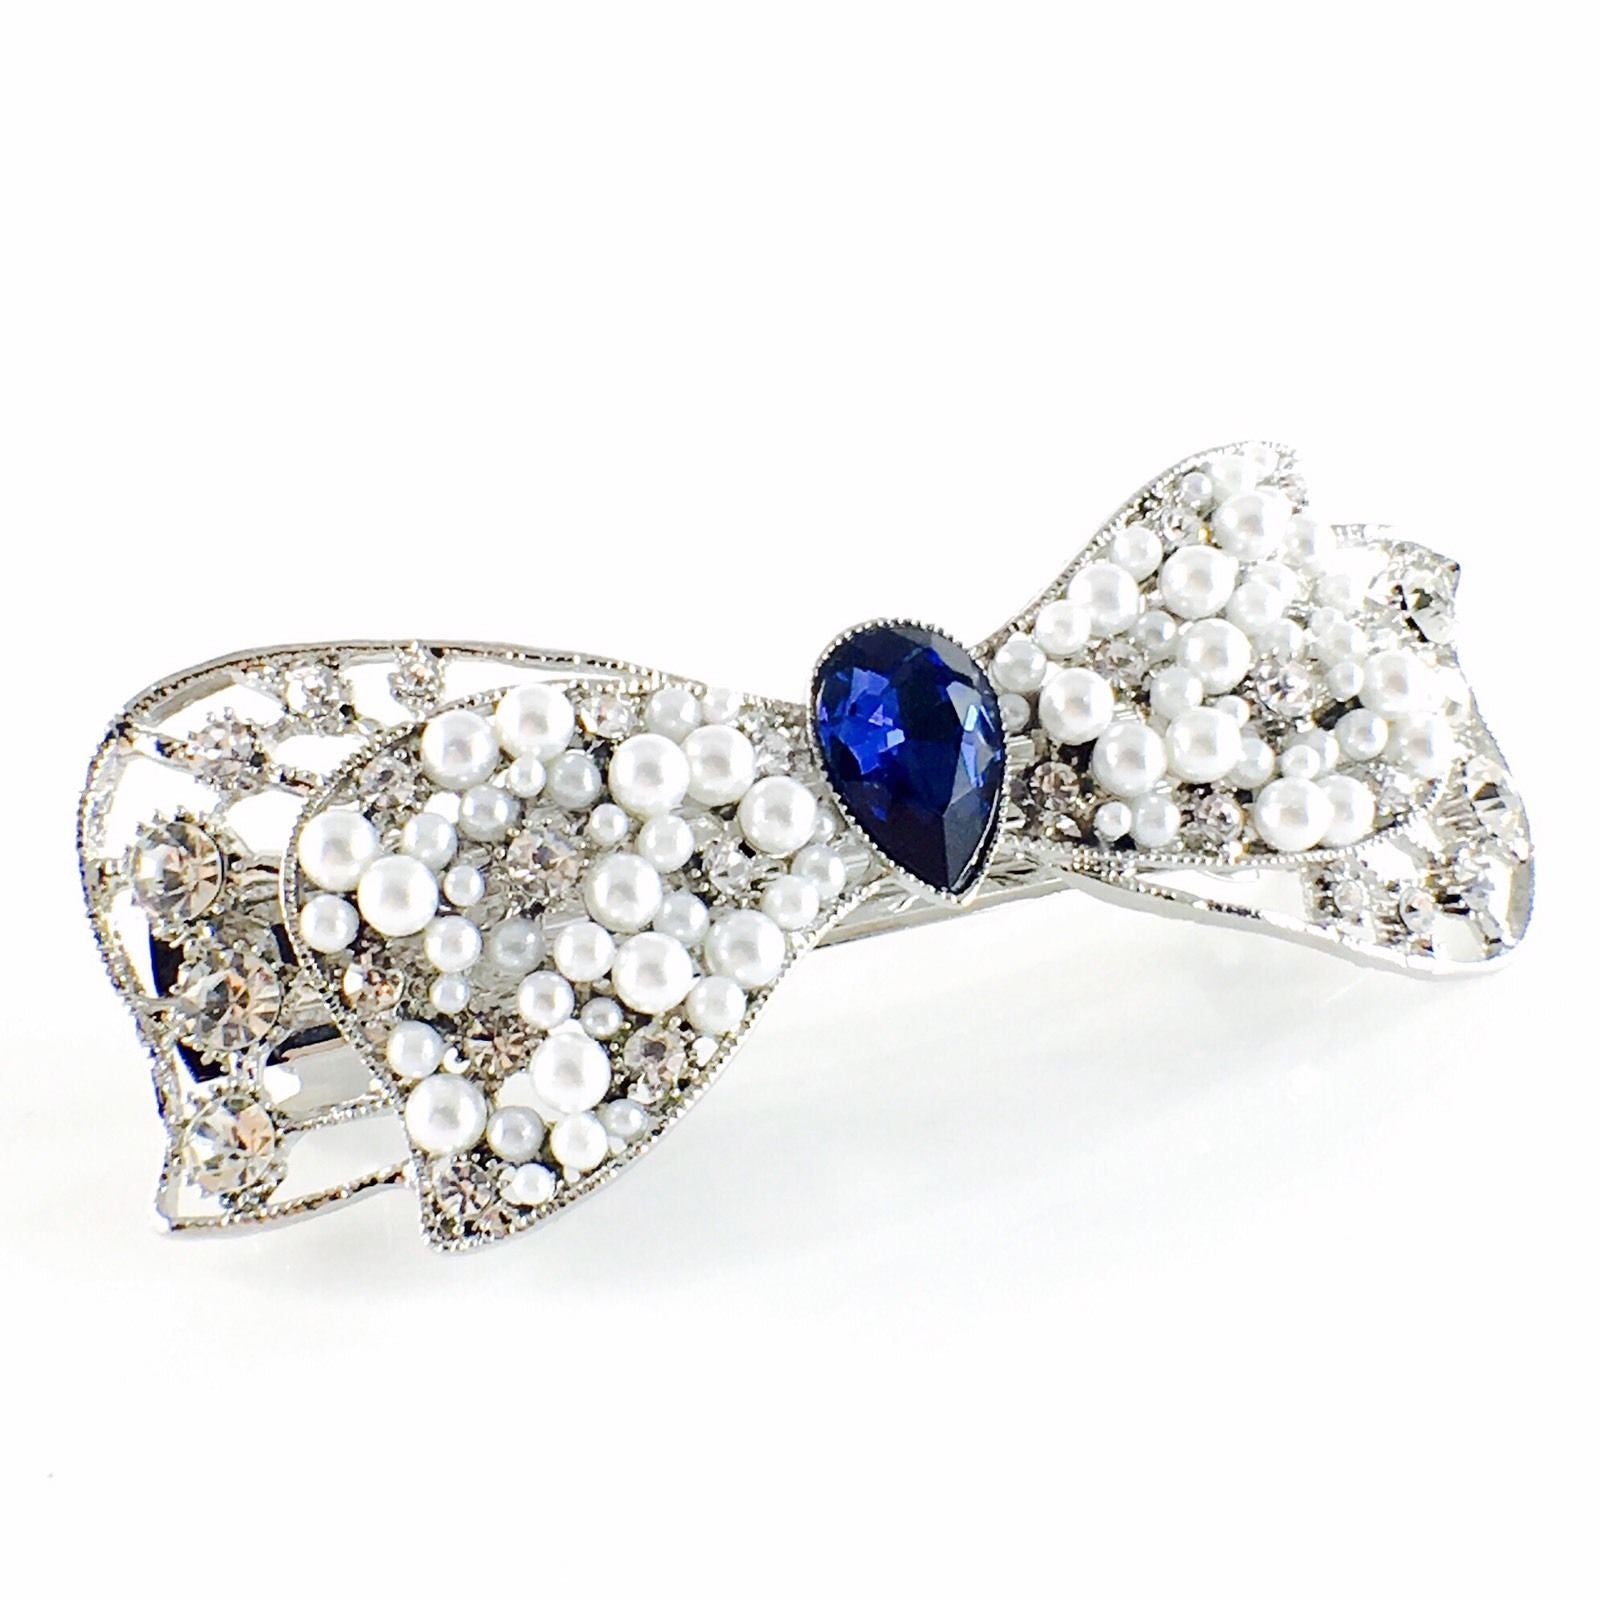 Bow Knot Barrette Rhinestone Crystal silver base white pearls Clear Navy Blue, Barrette - MOGHANT